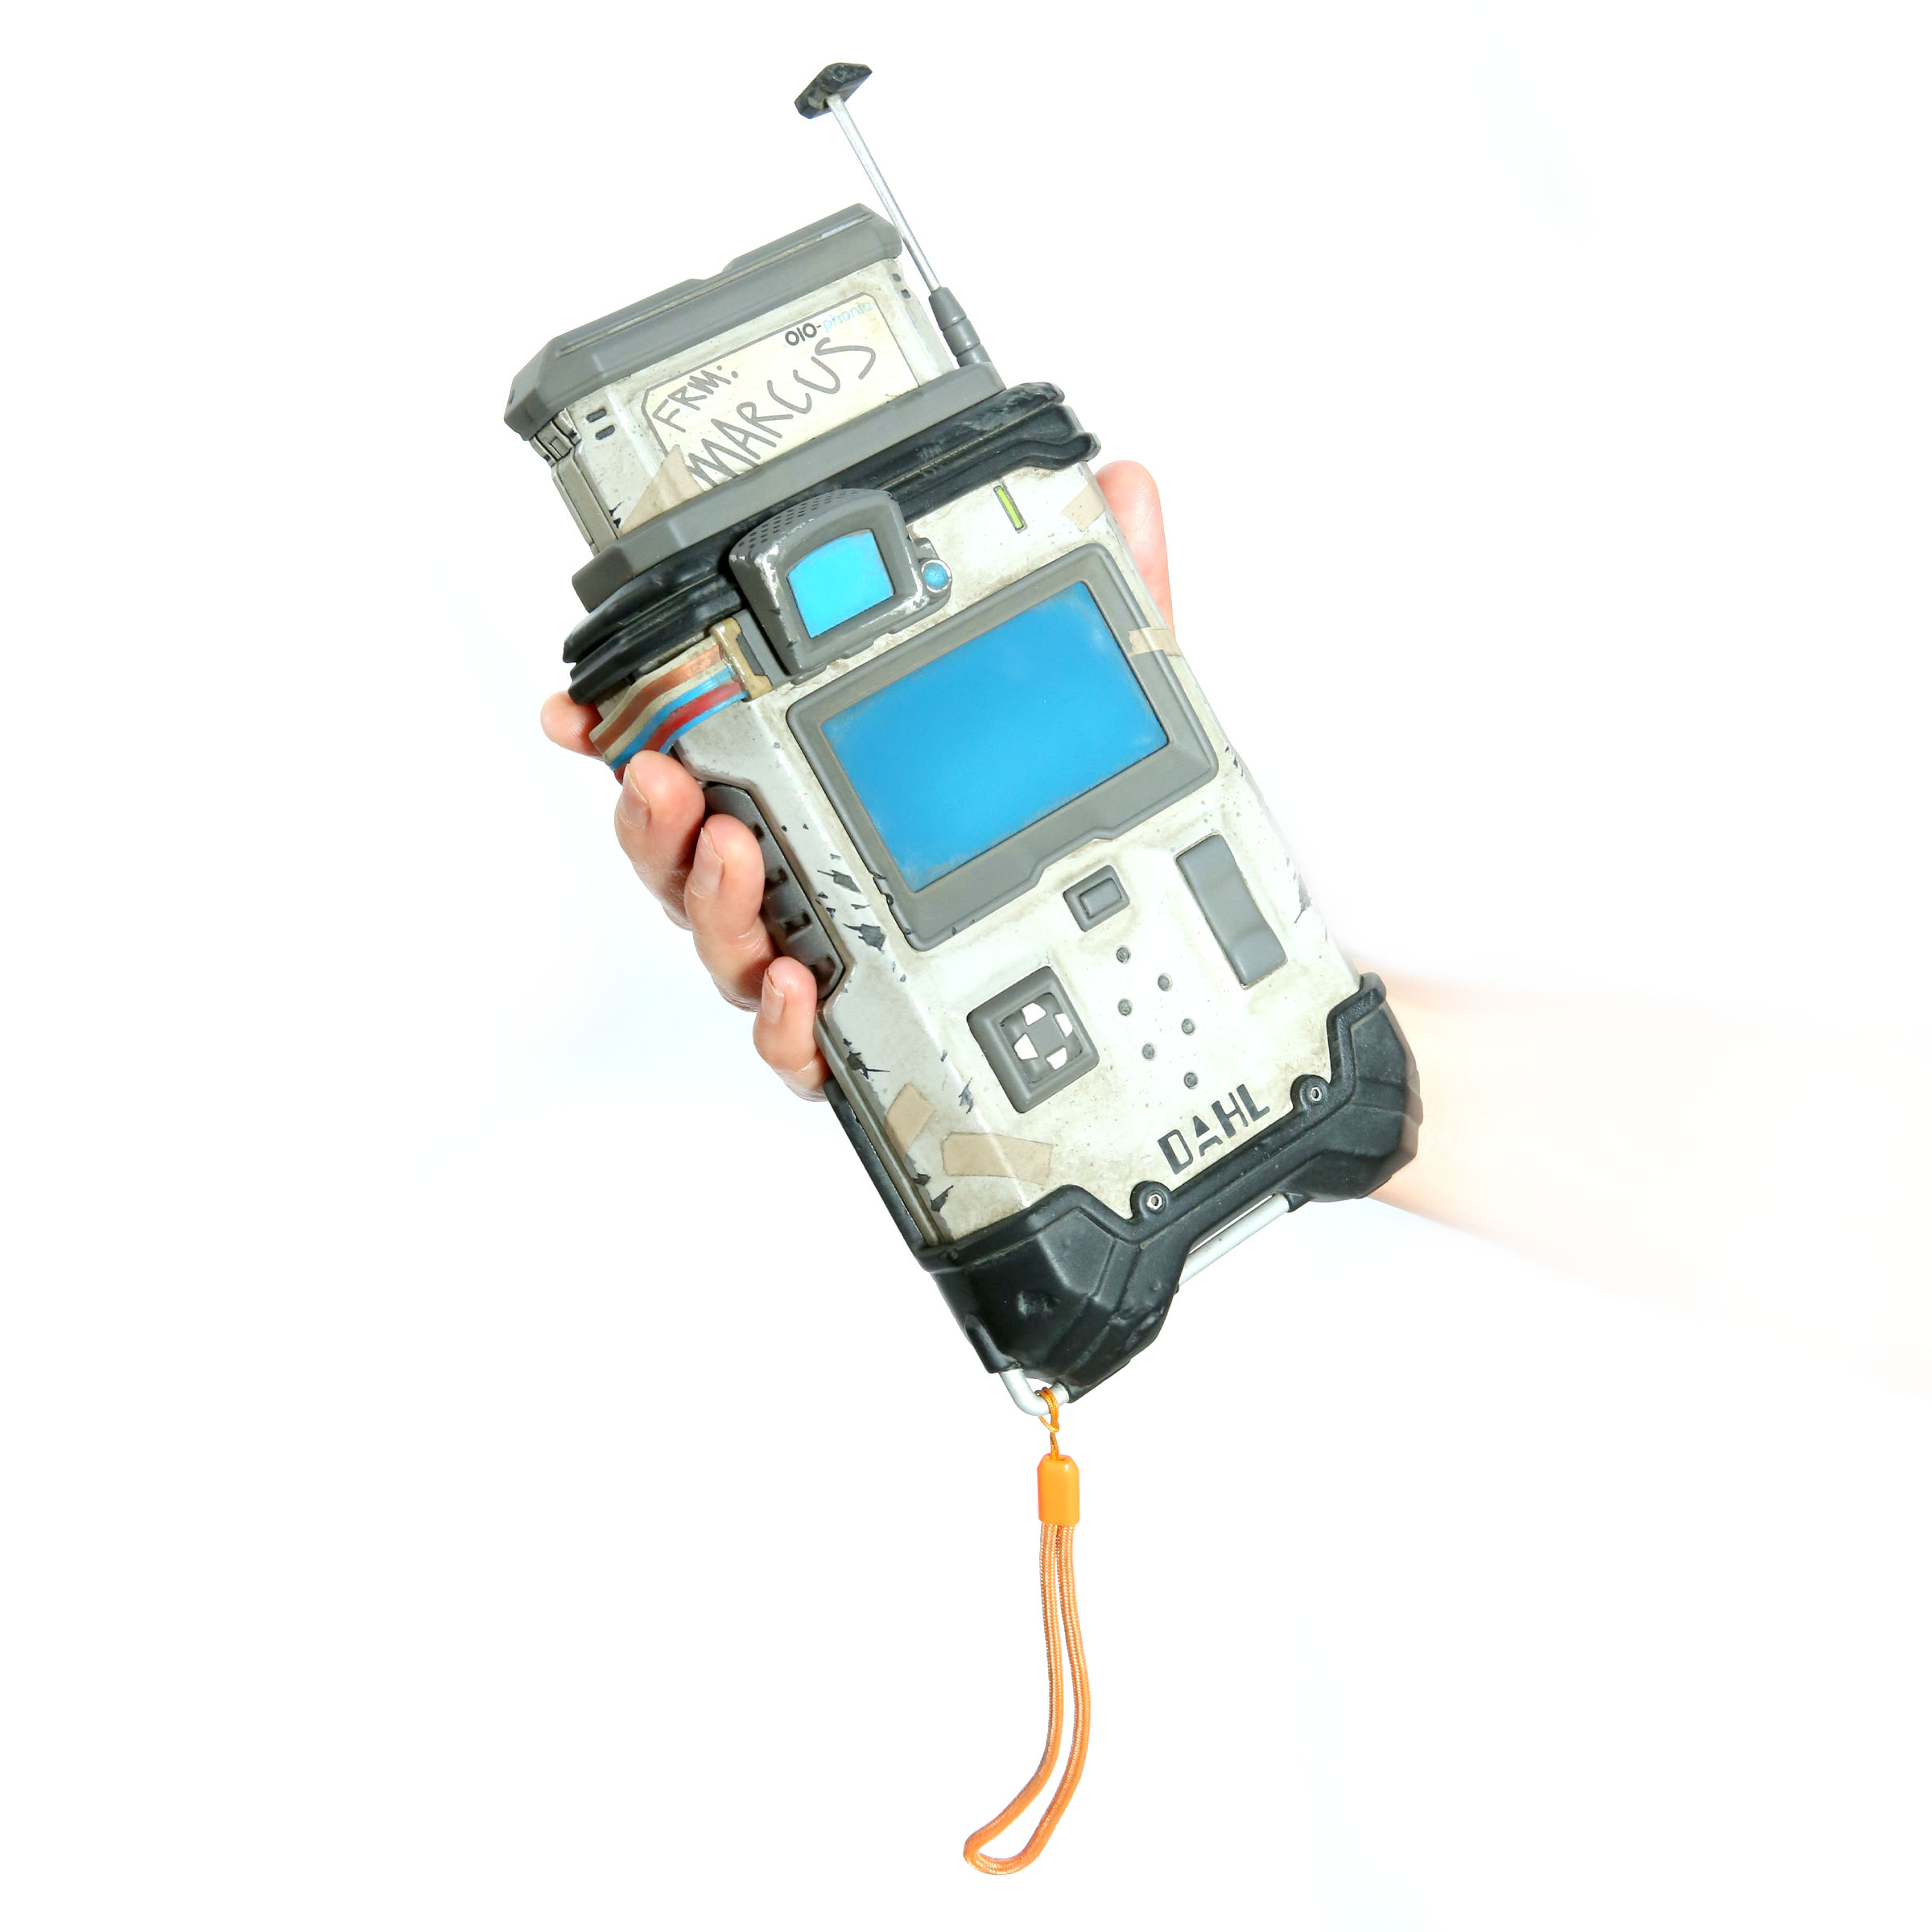 Borderlands ECHO Device from Chronicle Collectibles